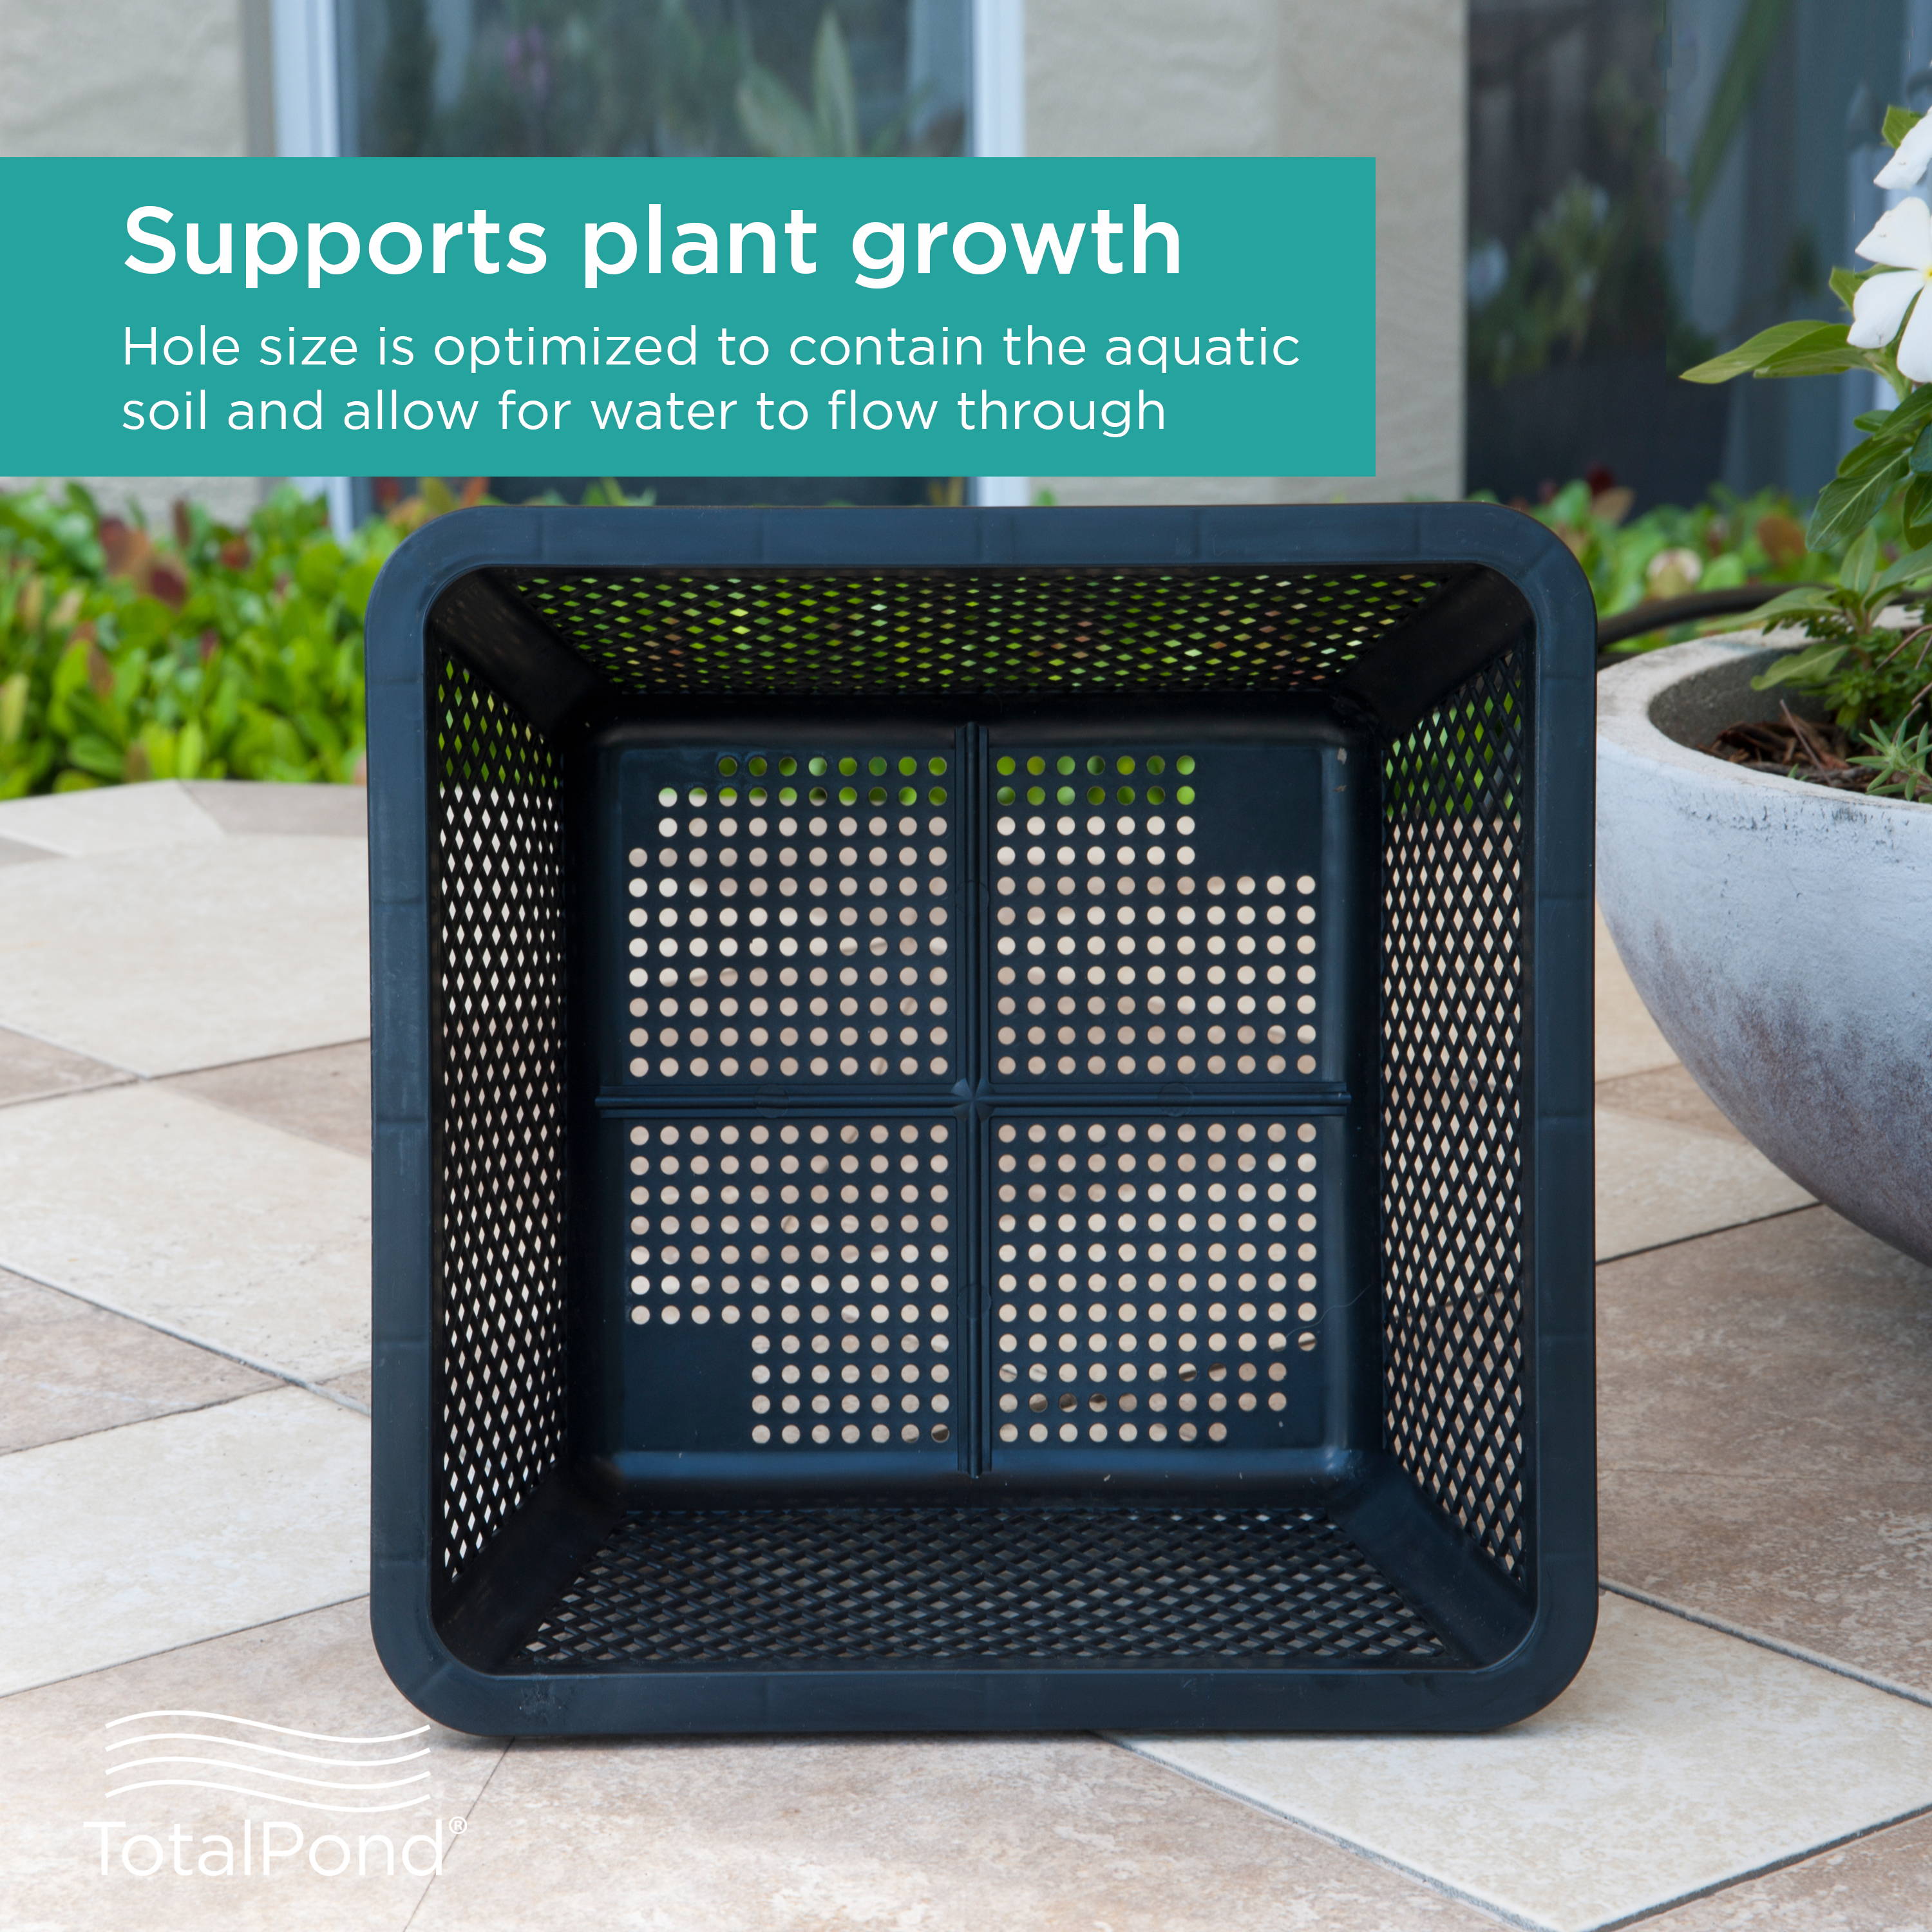 Plant Basket supports plant growth